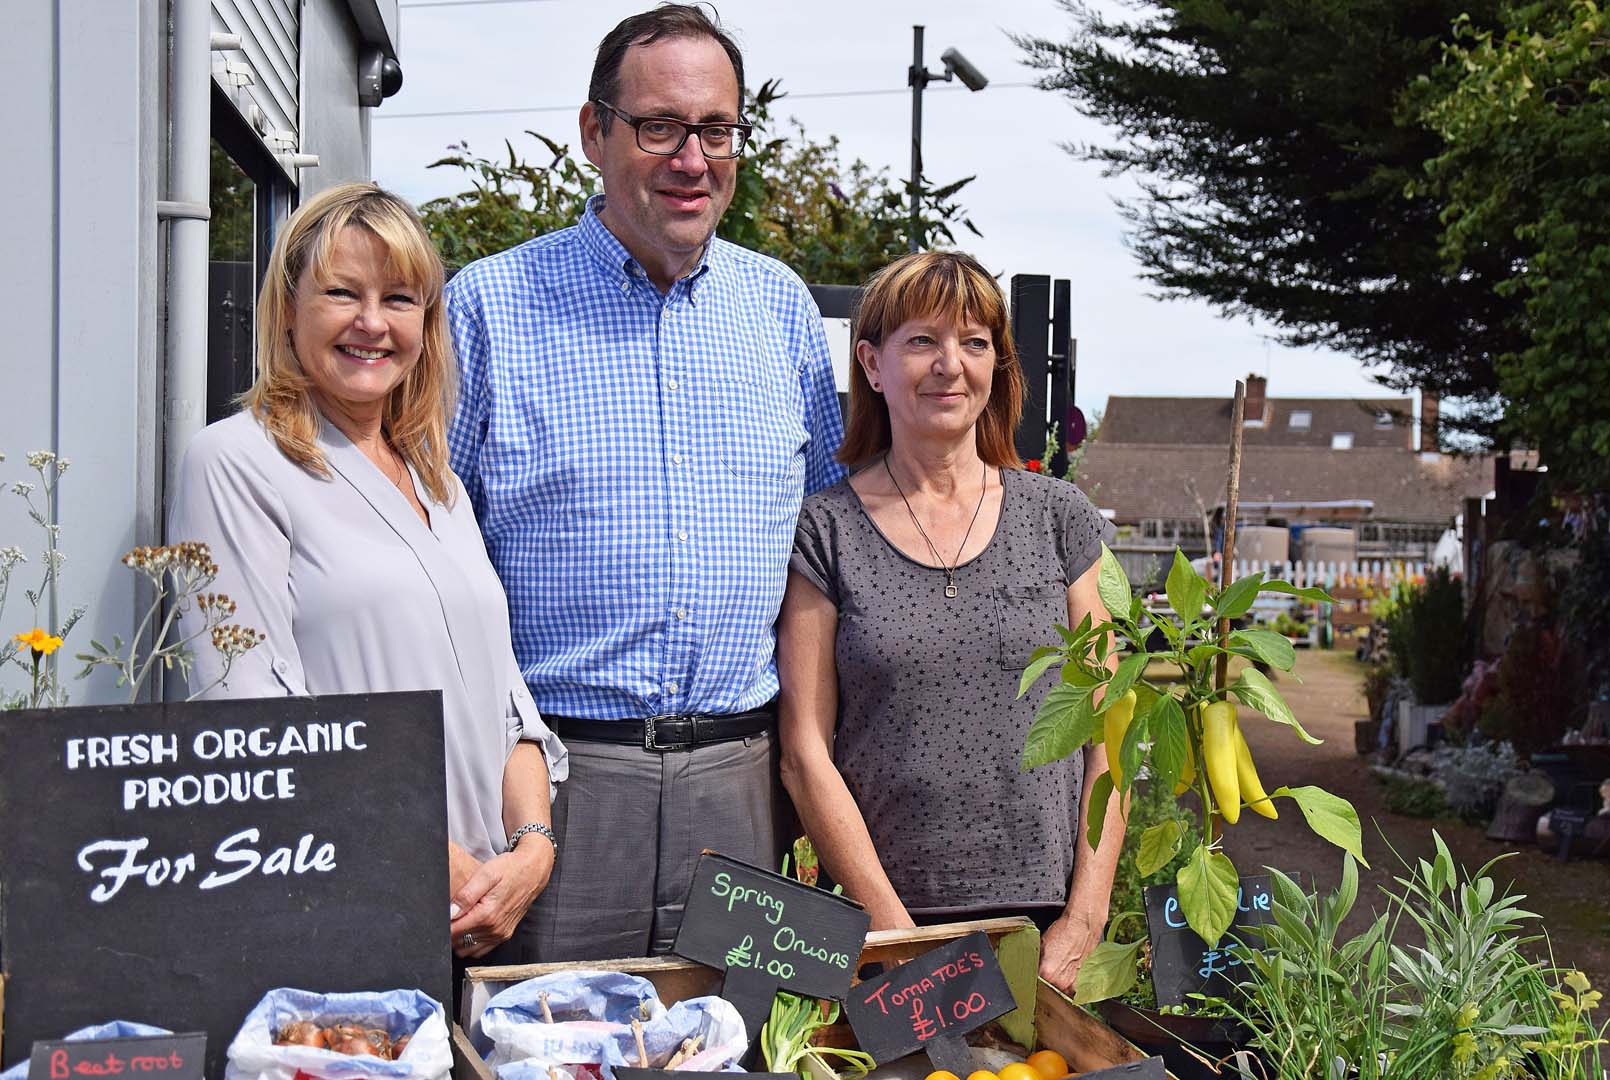 All Organic at the Green Canteen on the Meriden estate in Watford, as elected Conservative MP Richard Harrington discovered when he called in today.